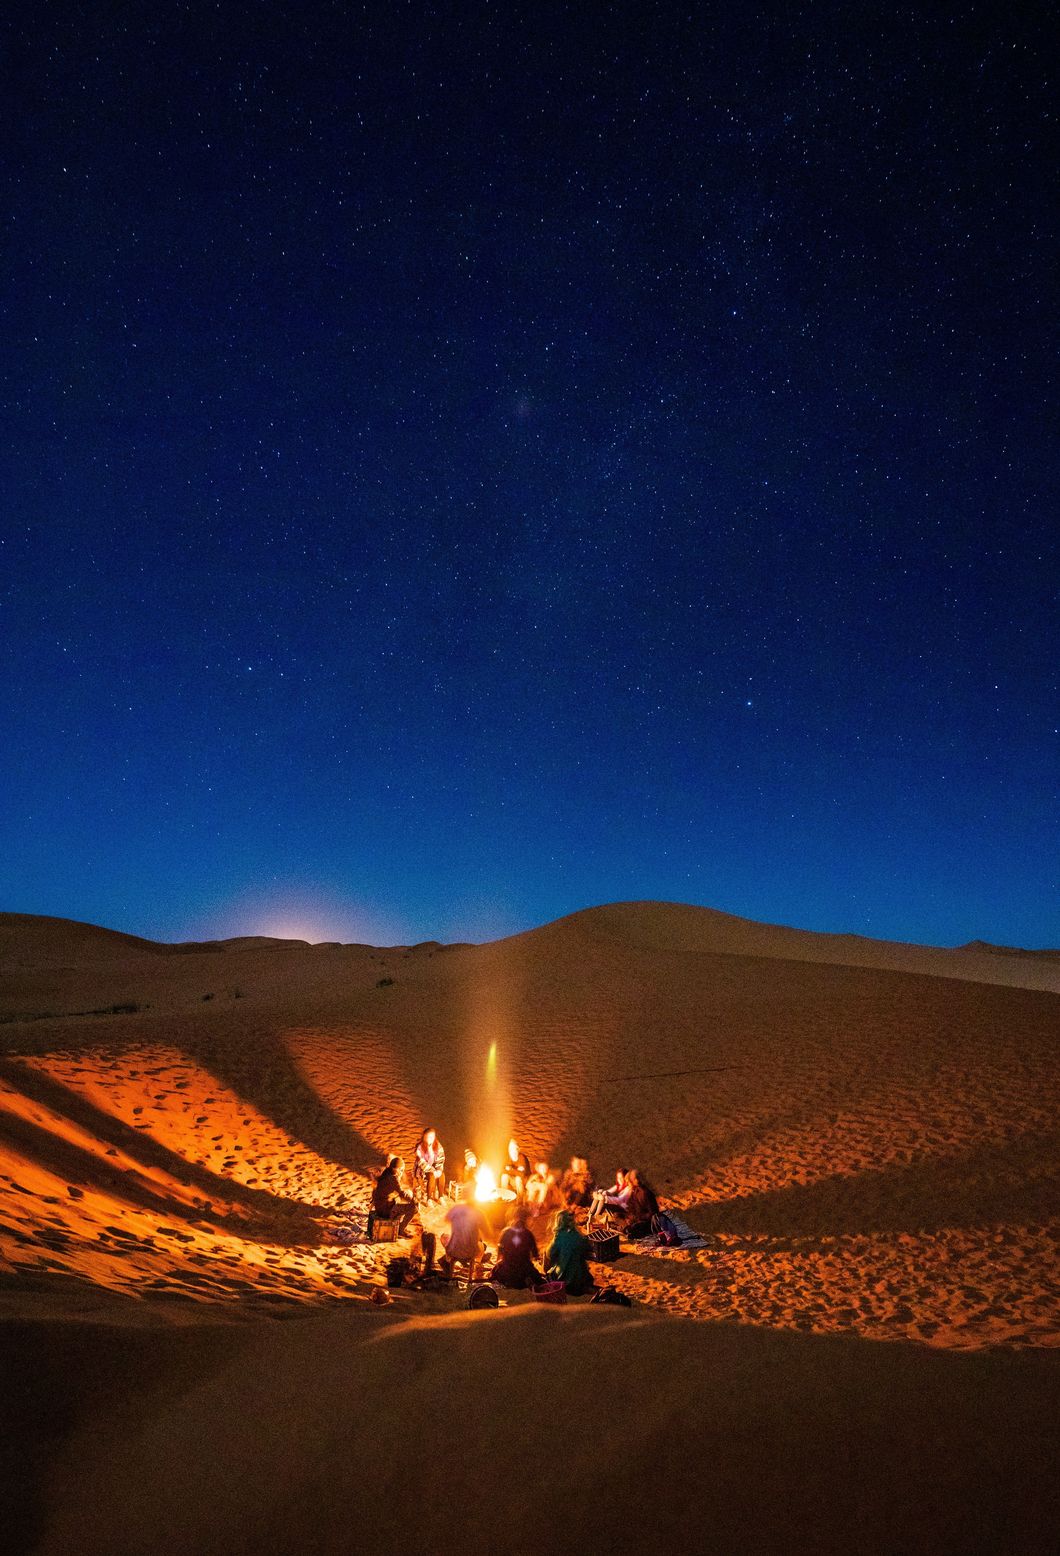 https://www.pexels.com/photo/people-sitting-in-front-of-bonfire-in-desert-during-nighttime-1703314/